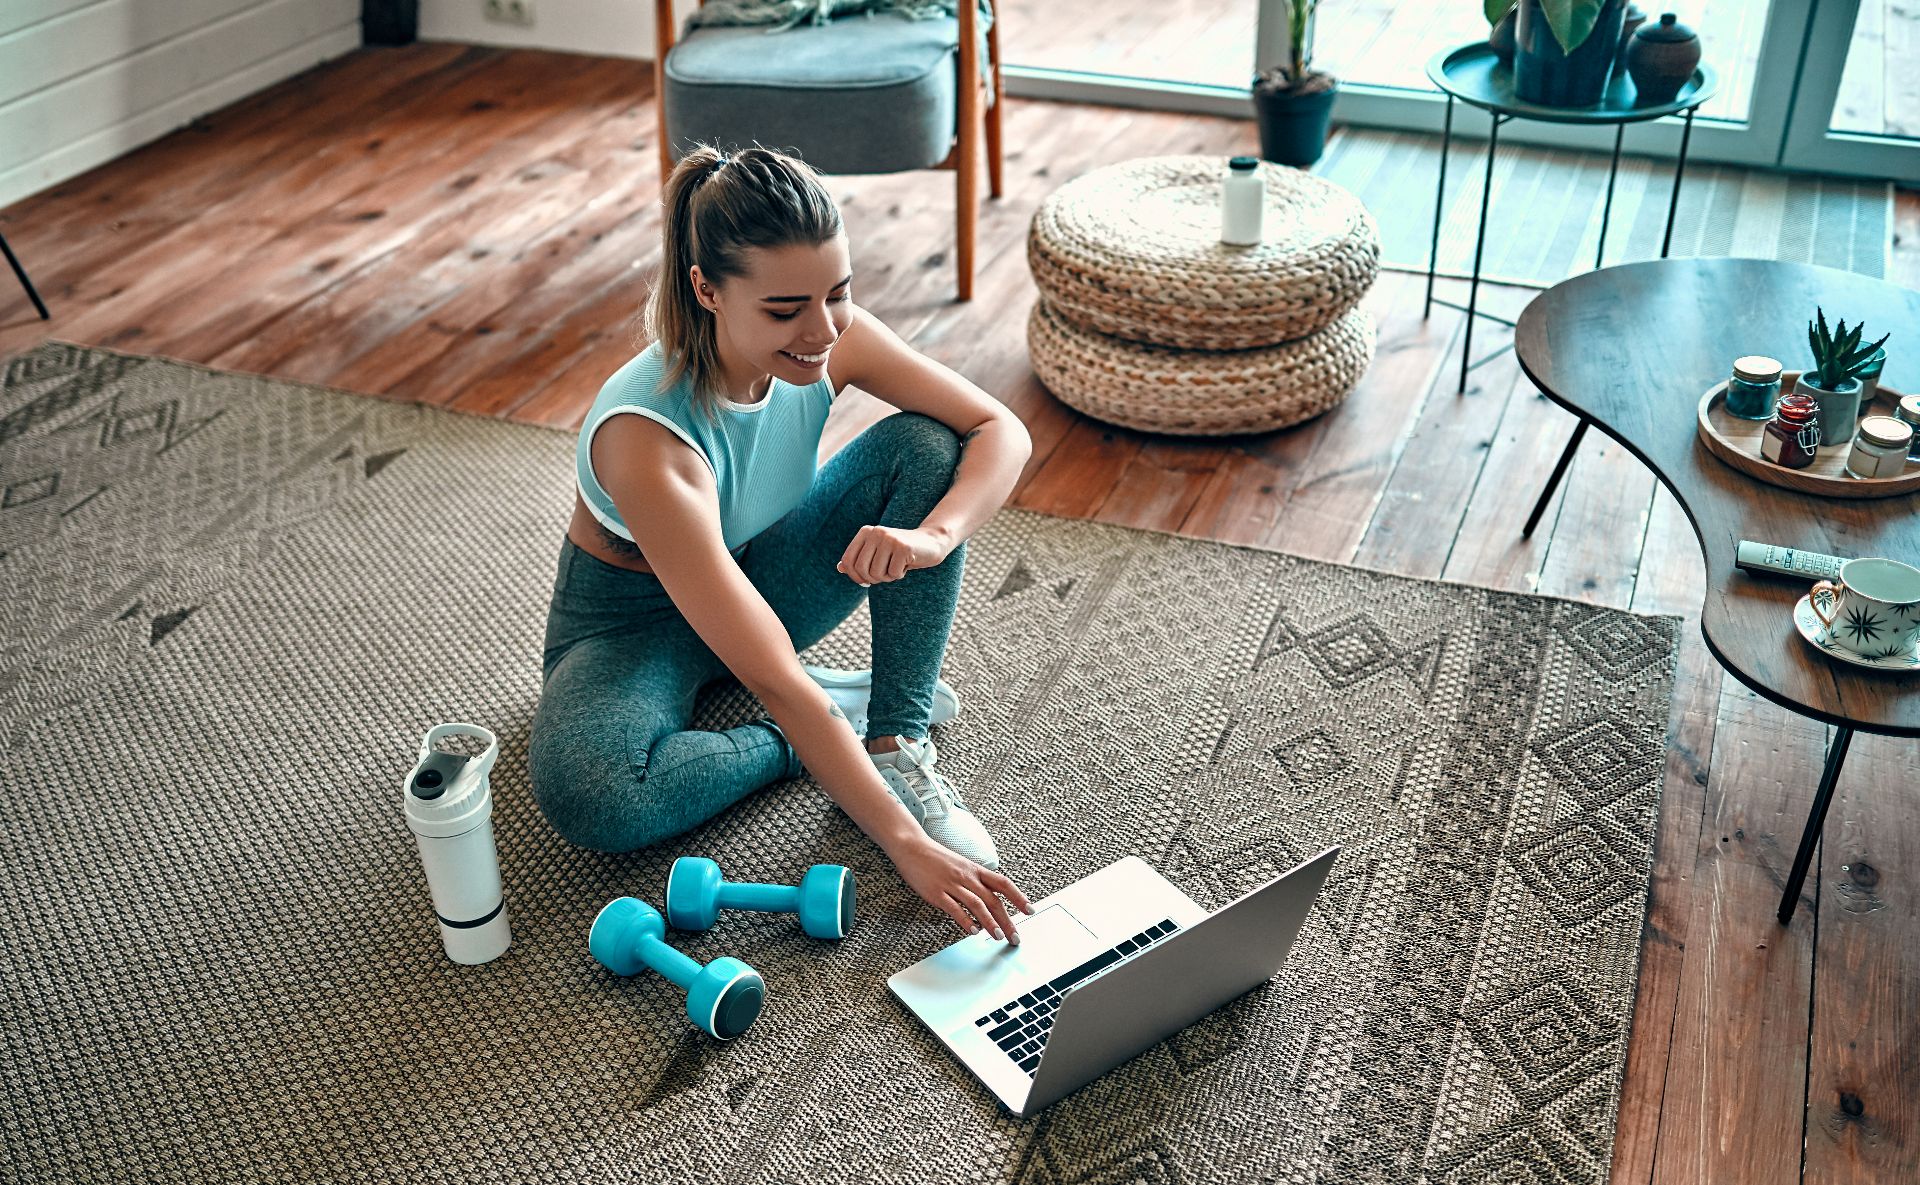 8 Great Ways To Work Out From Home